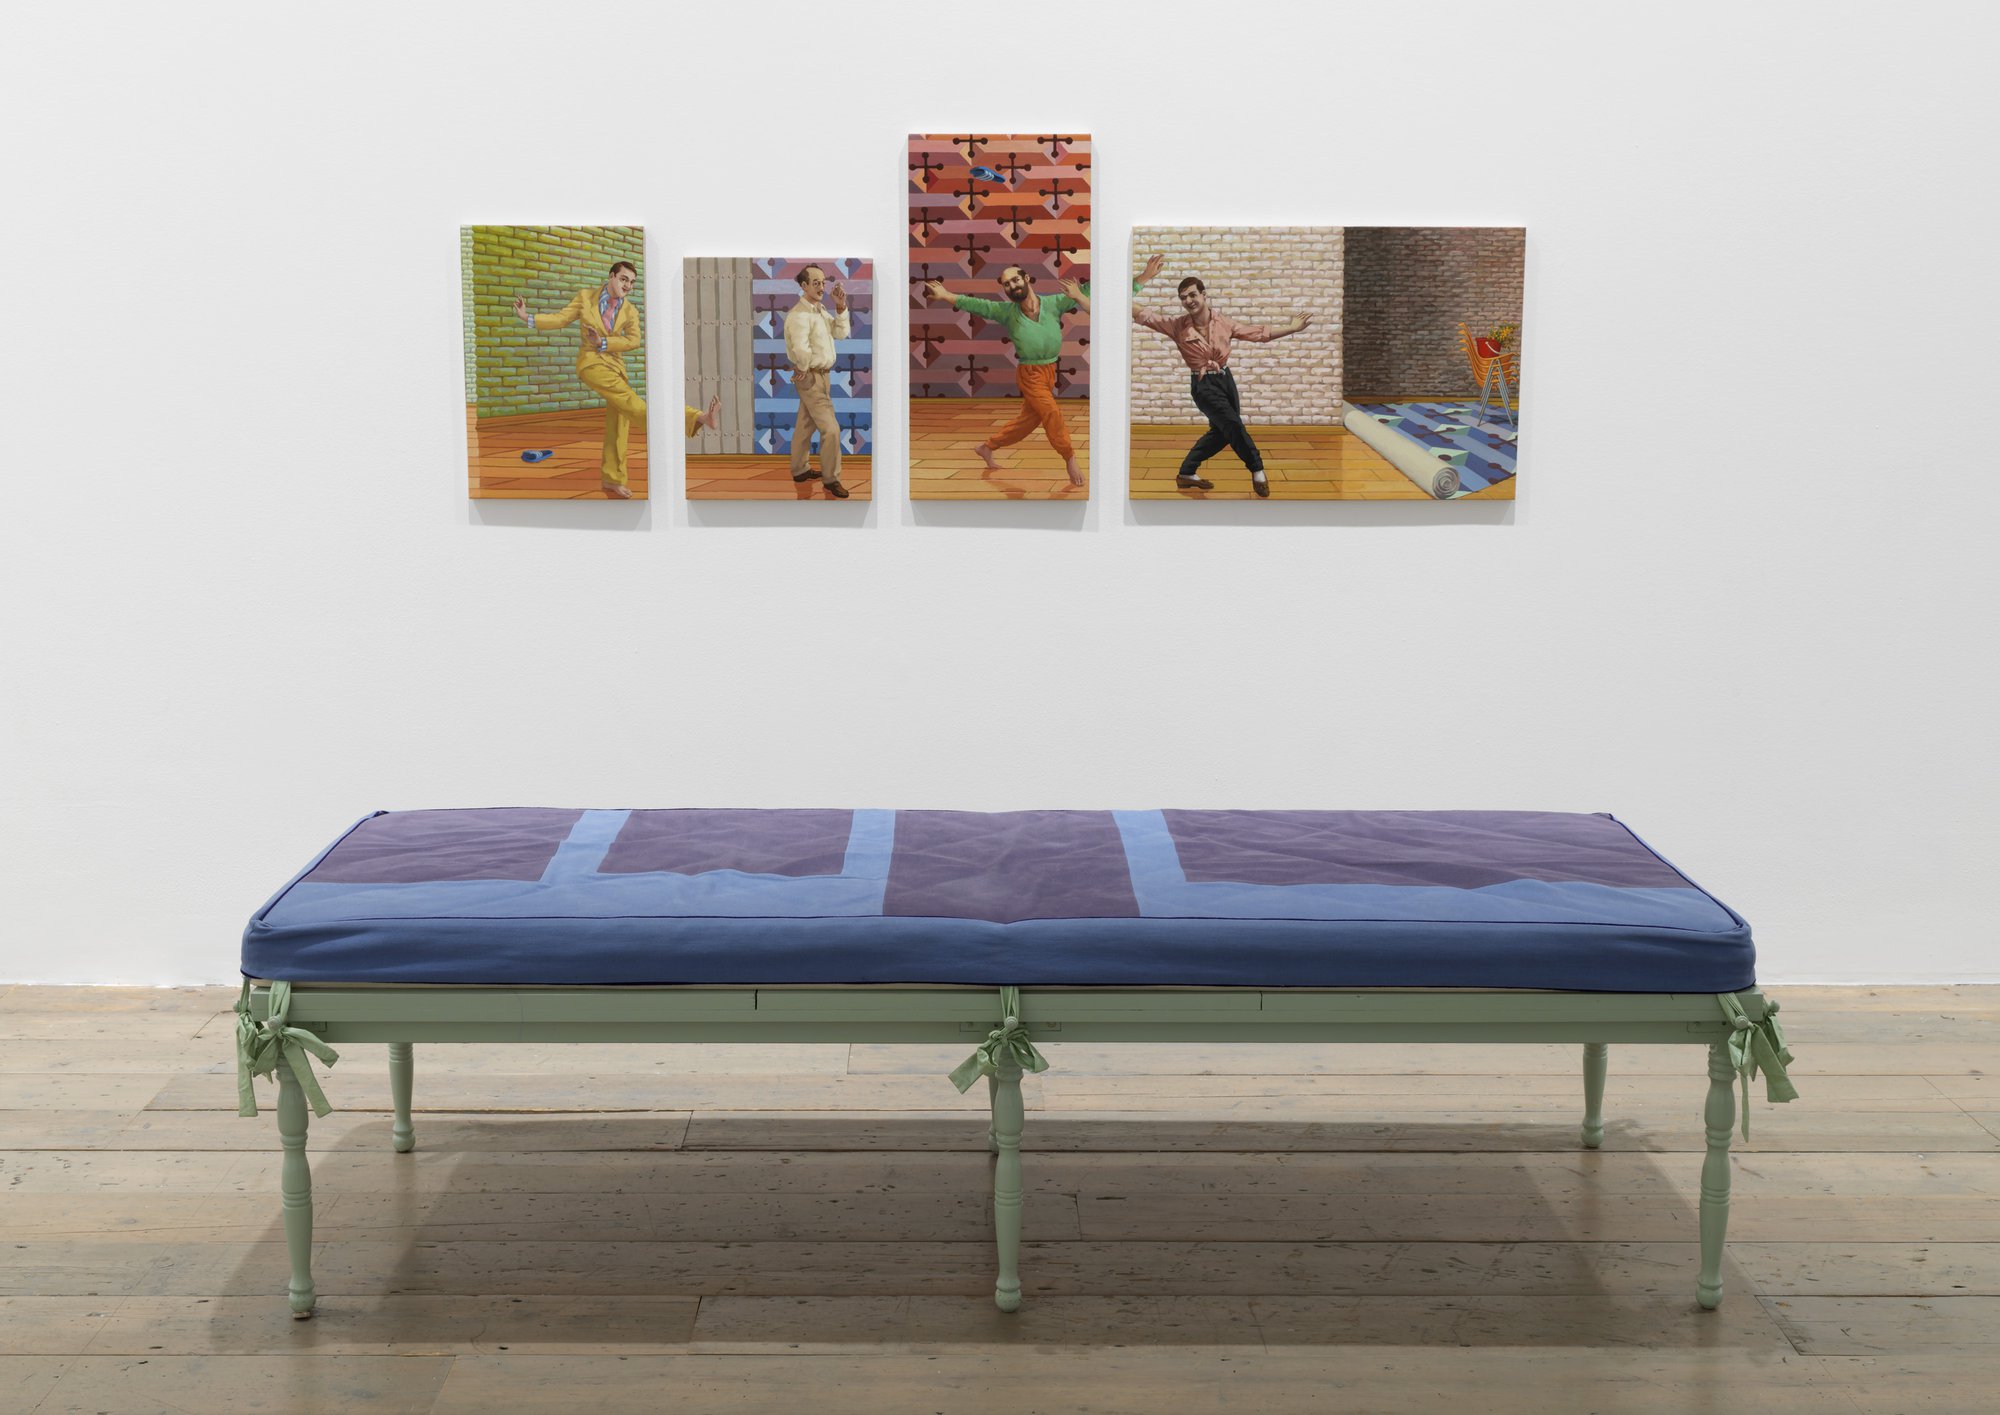 Lukas Duwenhögger, One Rehearsal For Four Plays, 1996. Installation View, Undoolay, Artists Space, New York, 2016